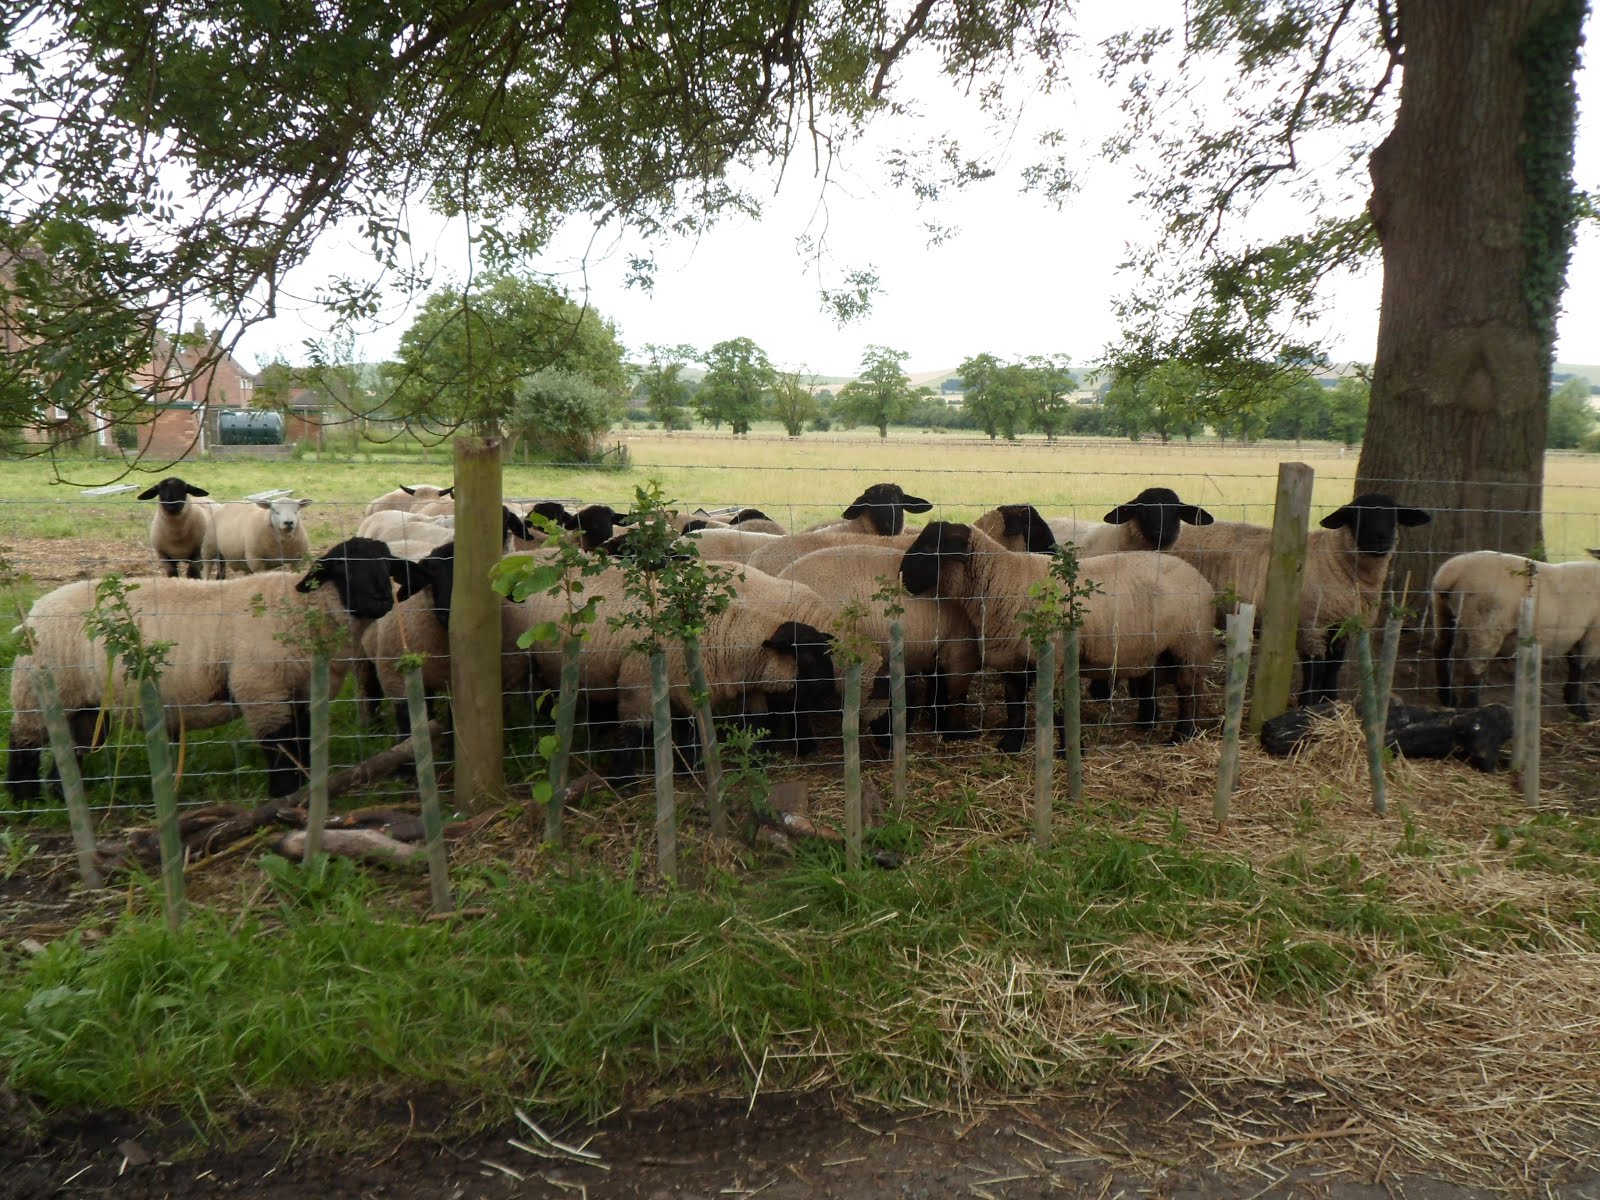 Some Local Sheep